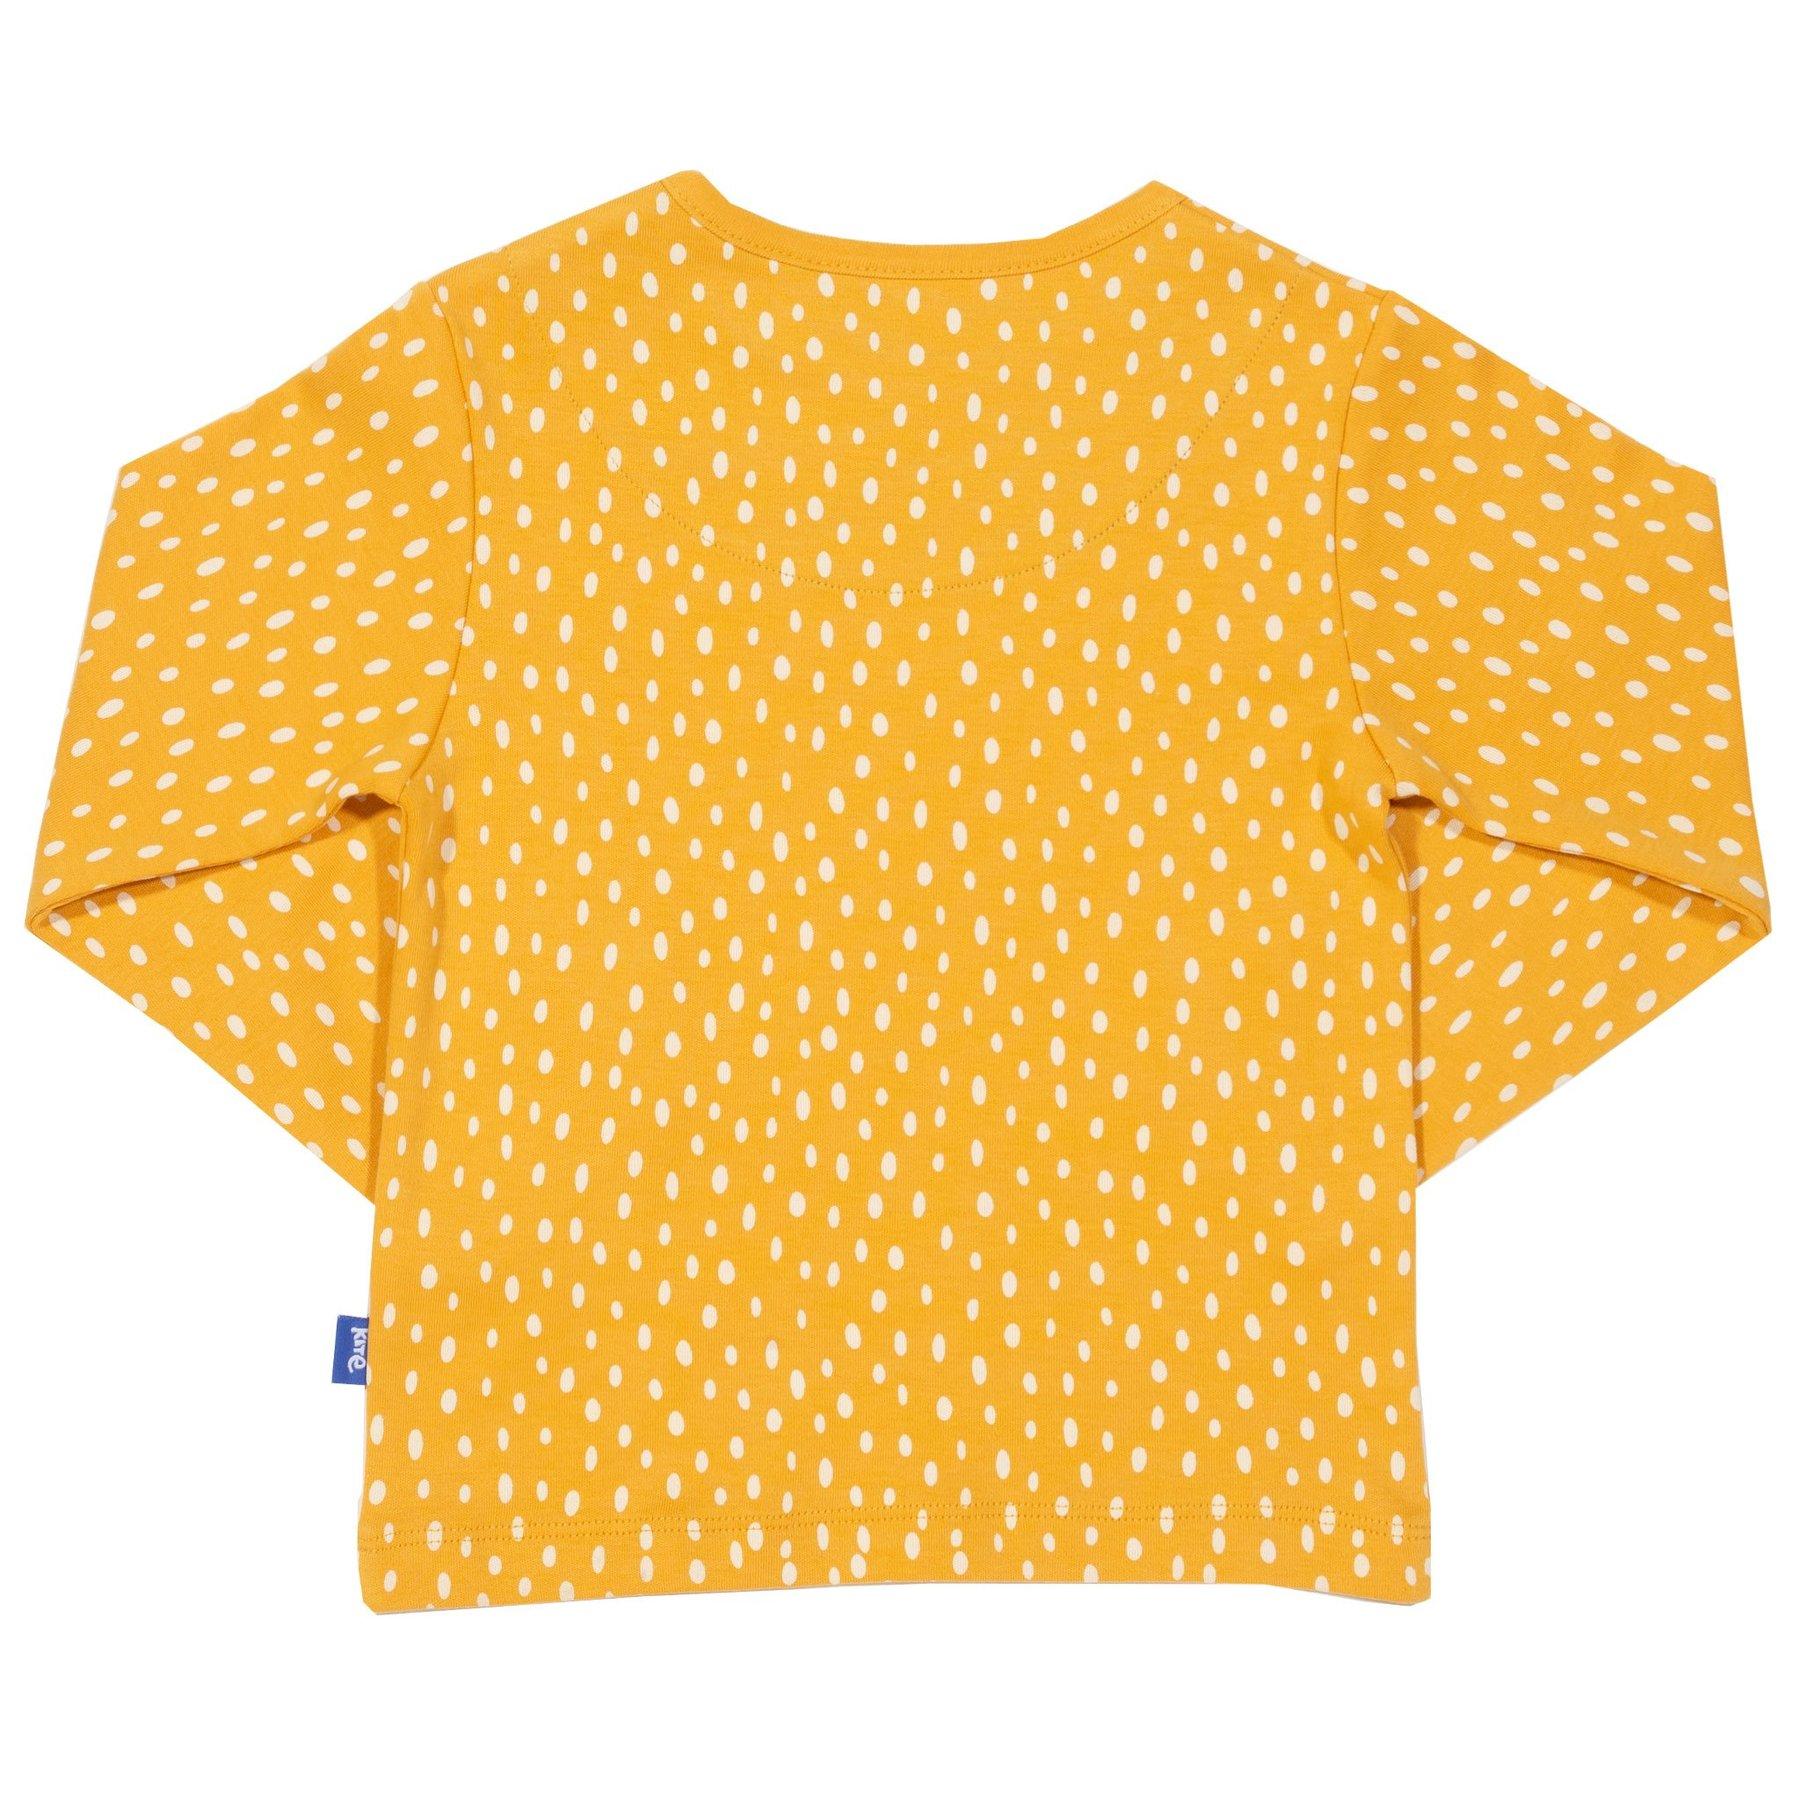 Kite Clothing Speckle T-Shirt back